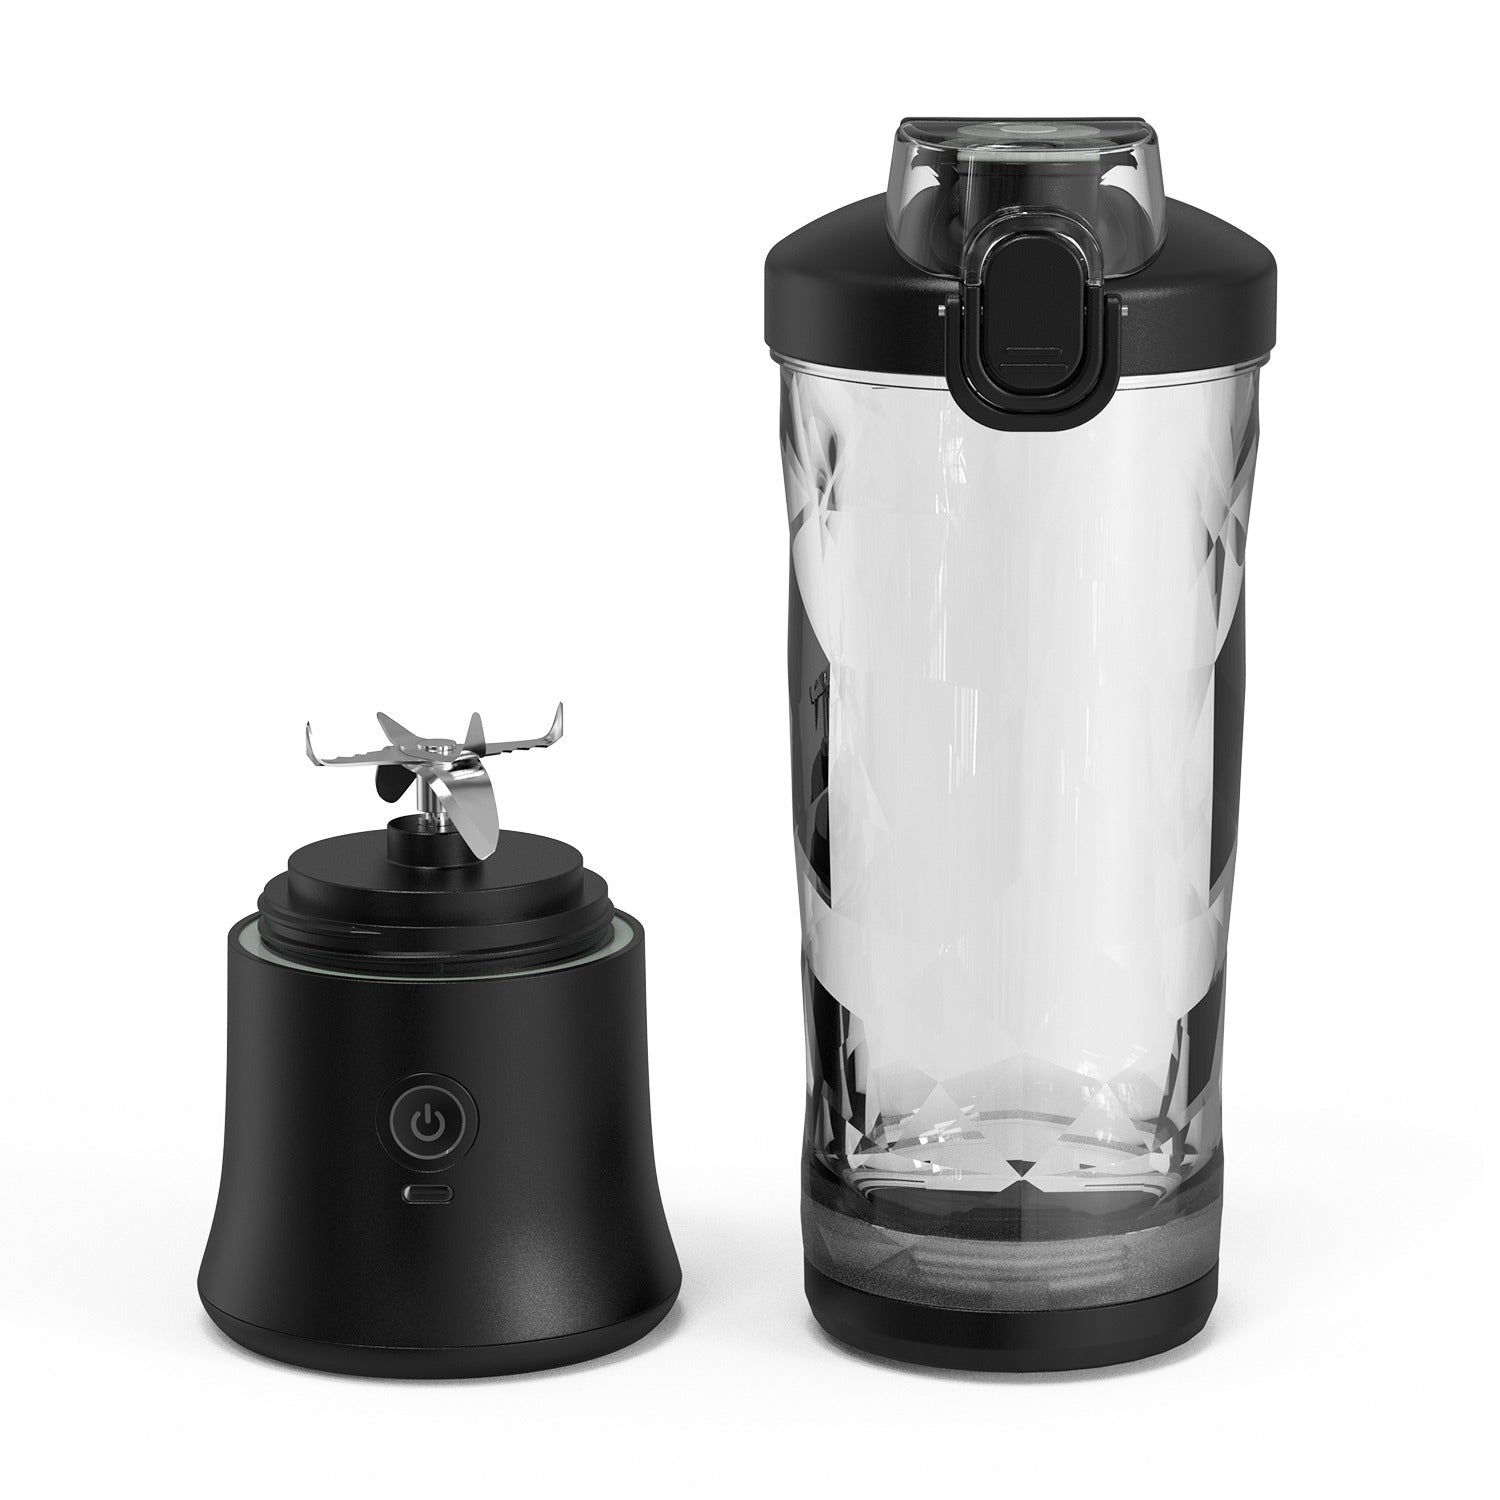 Portable Blenders: The Health Arsenal that Provides Nutrition at  Individual's Fingertips, Anytime, Anywhere